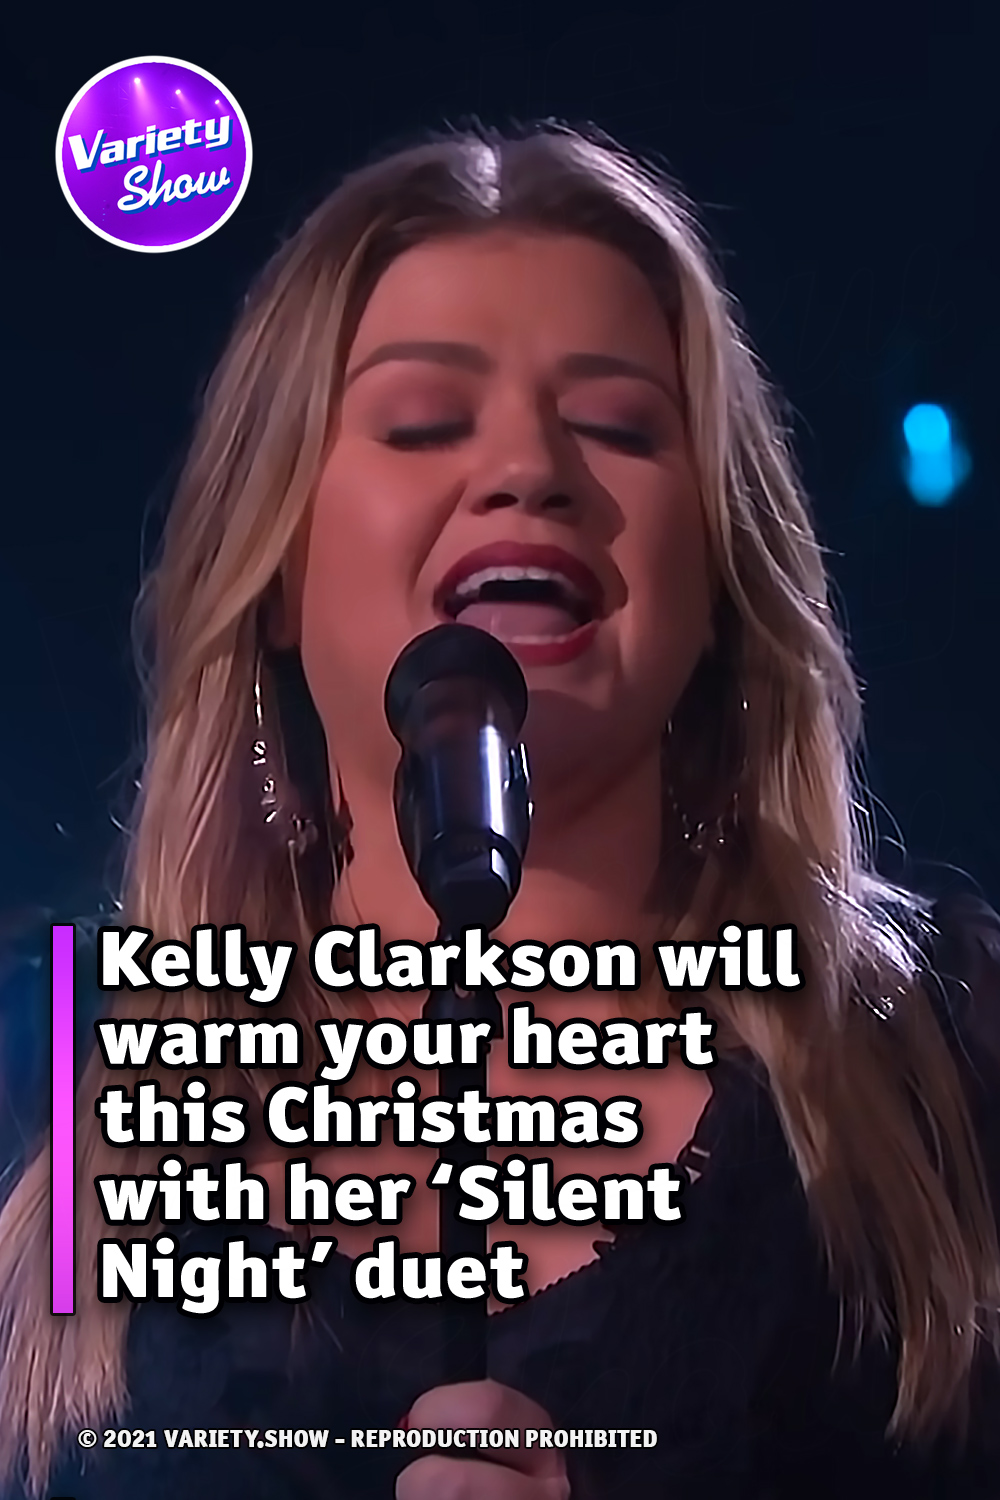 Kelly Clarkson will warm your heart this Christmas with her ‘Silent Night’ duet